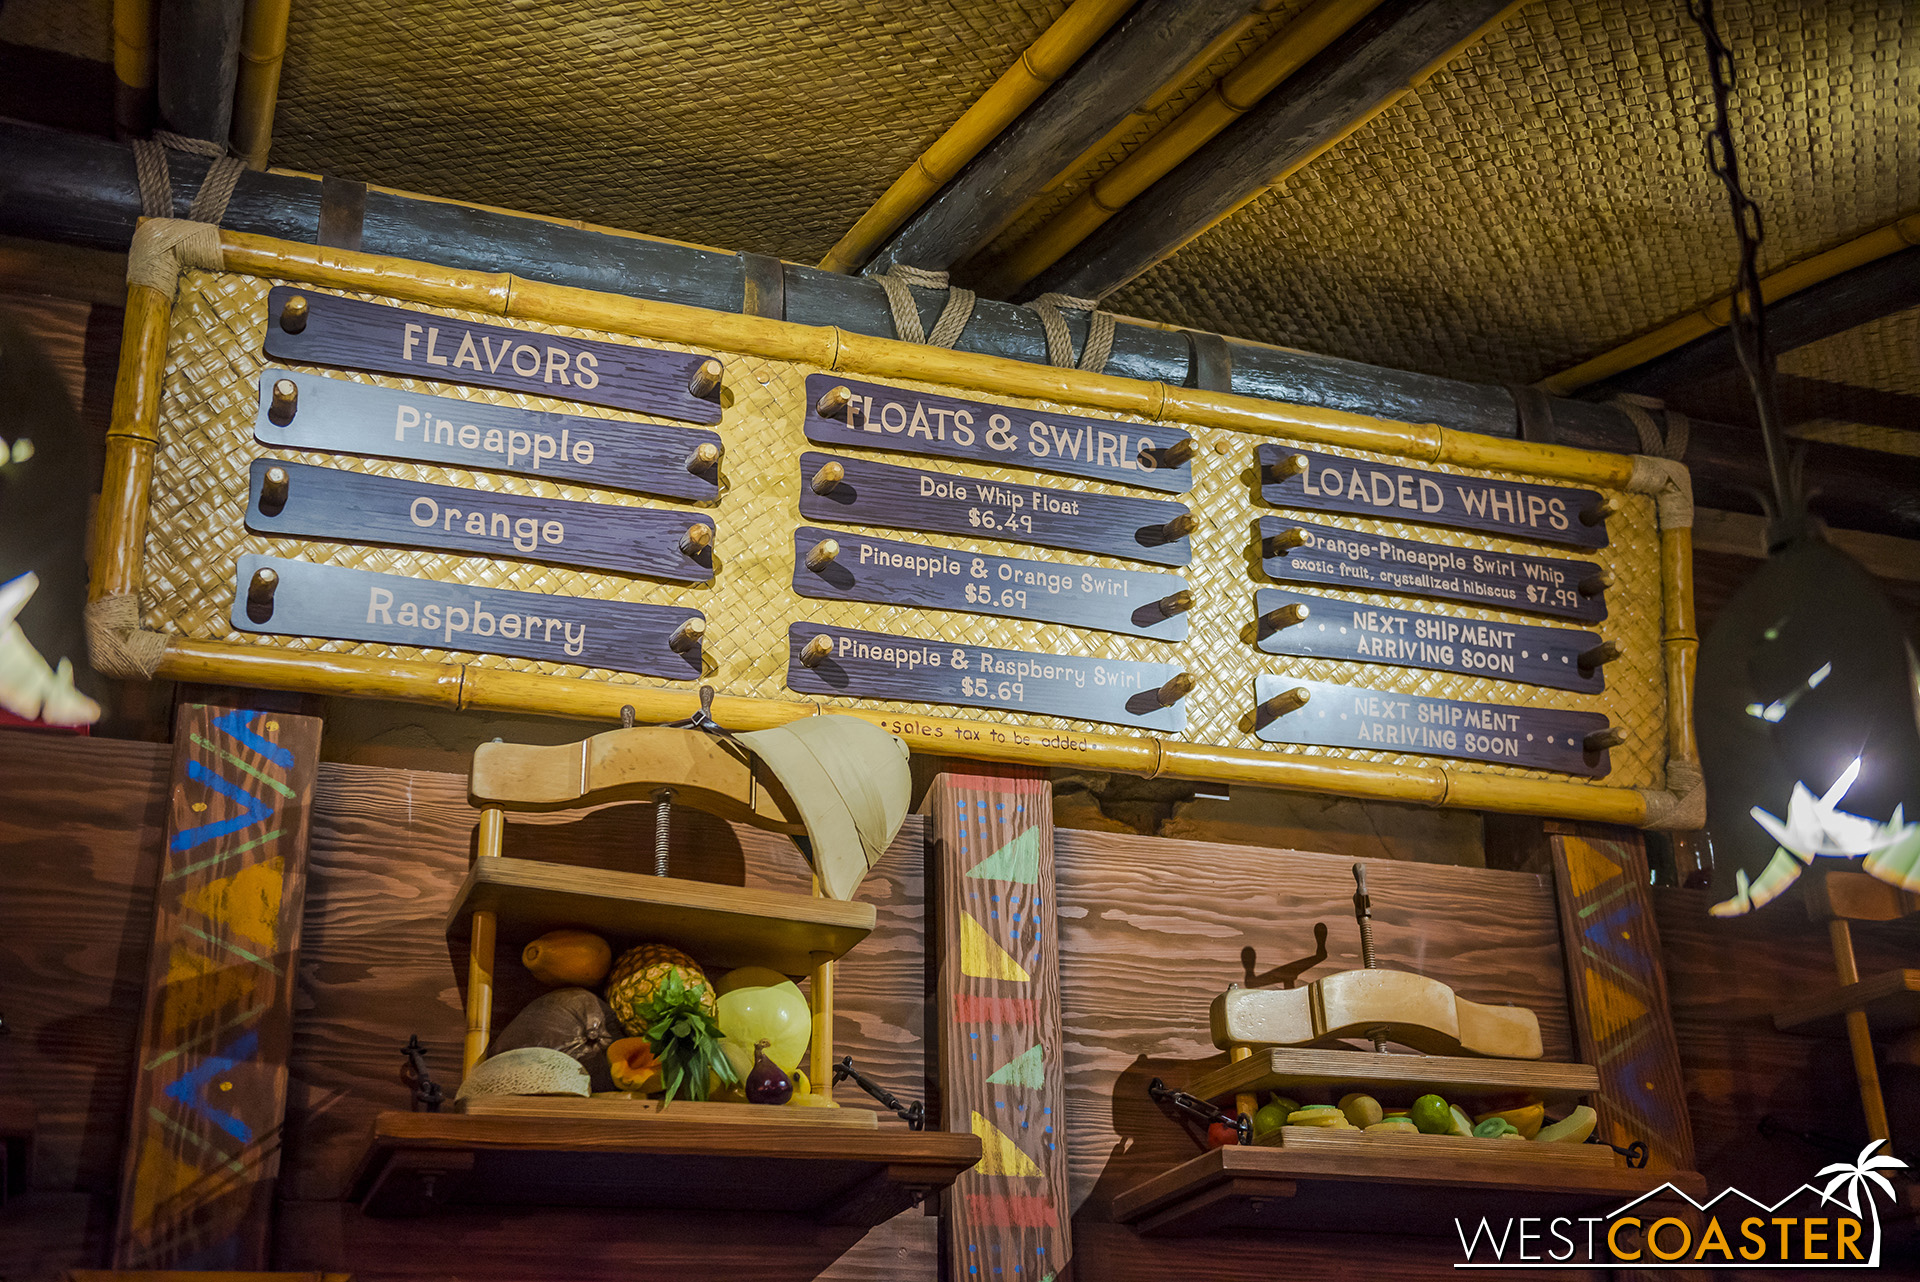  A look at the menu reveals new Dole Whip flavors! 